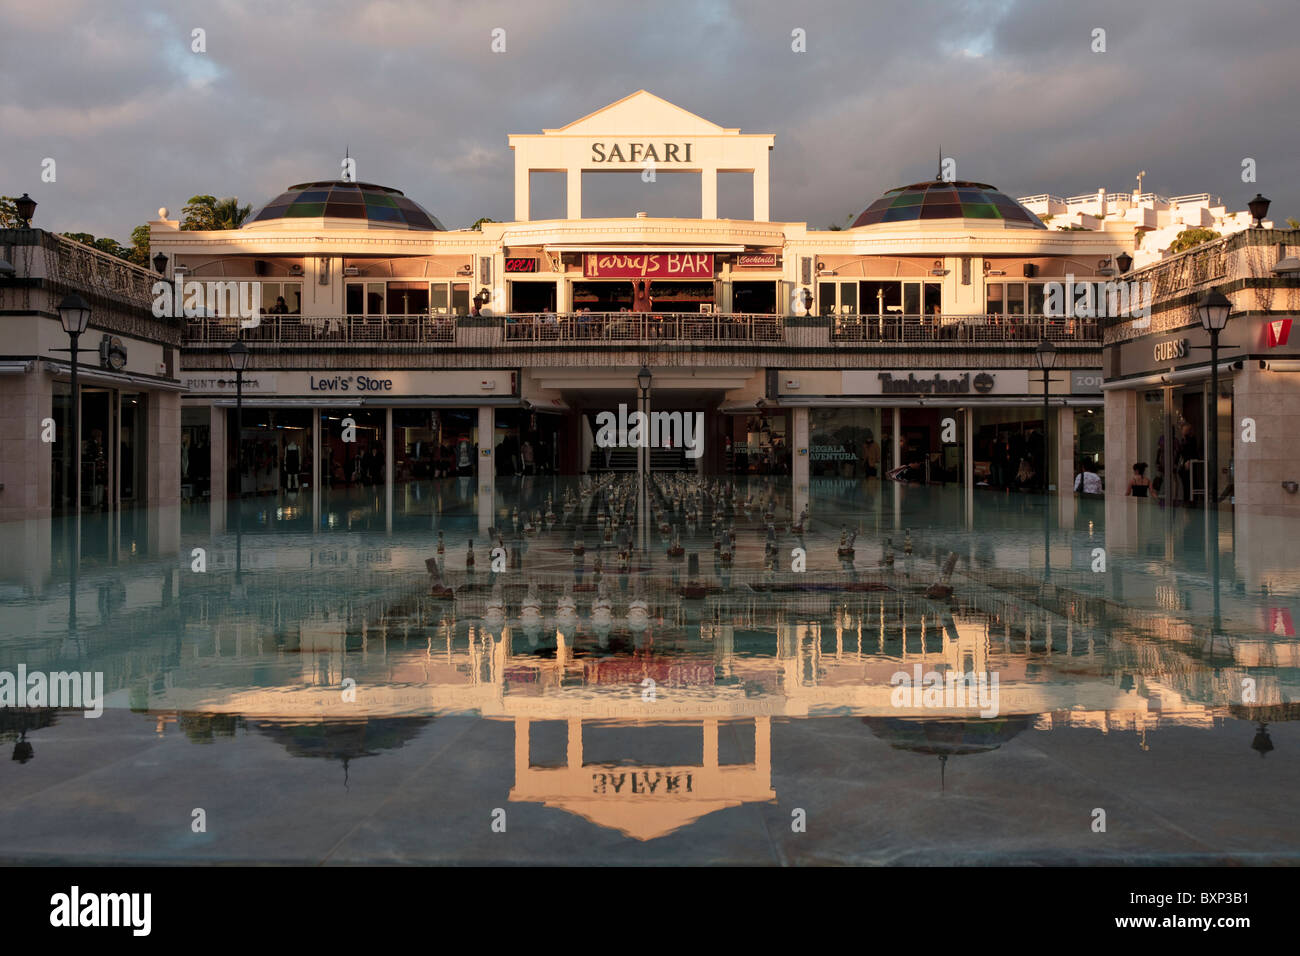 Safari shopping centre and Harrys Bar reflected in the fountain in the  centre Las Americas Tenerife Canary Islands Spain Stock Photo - Alamy